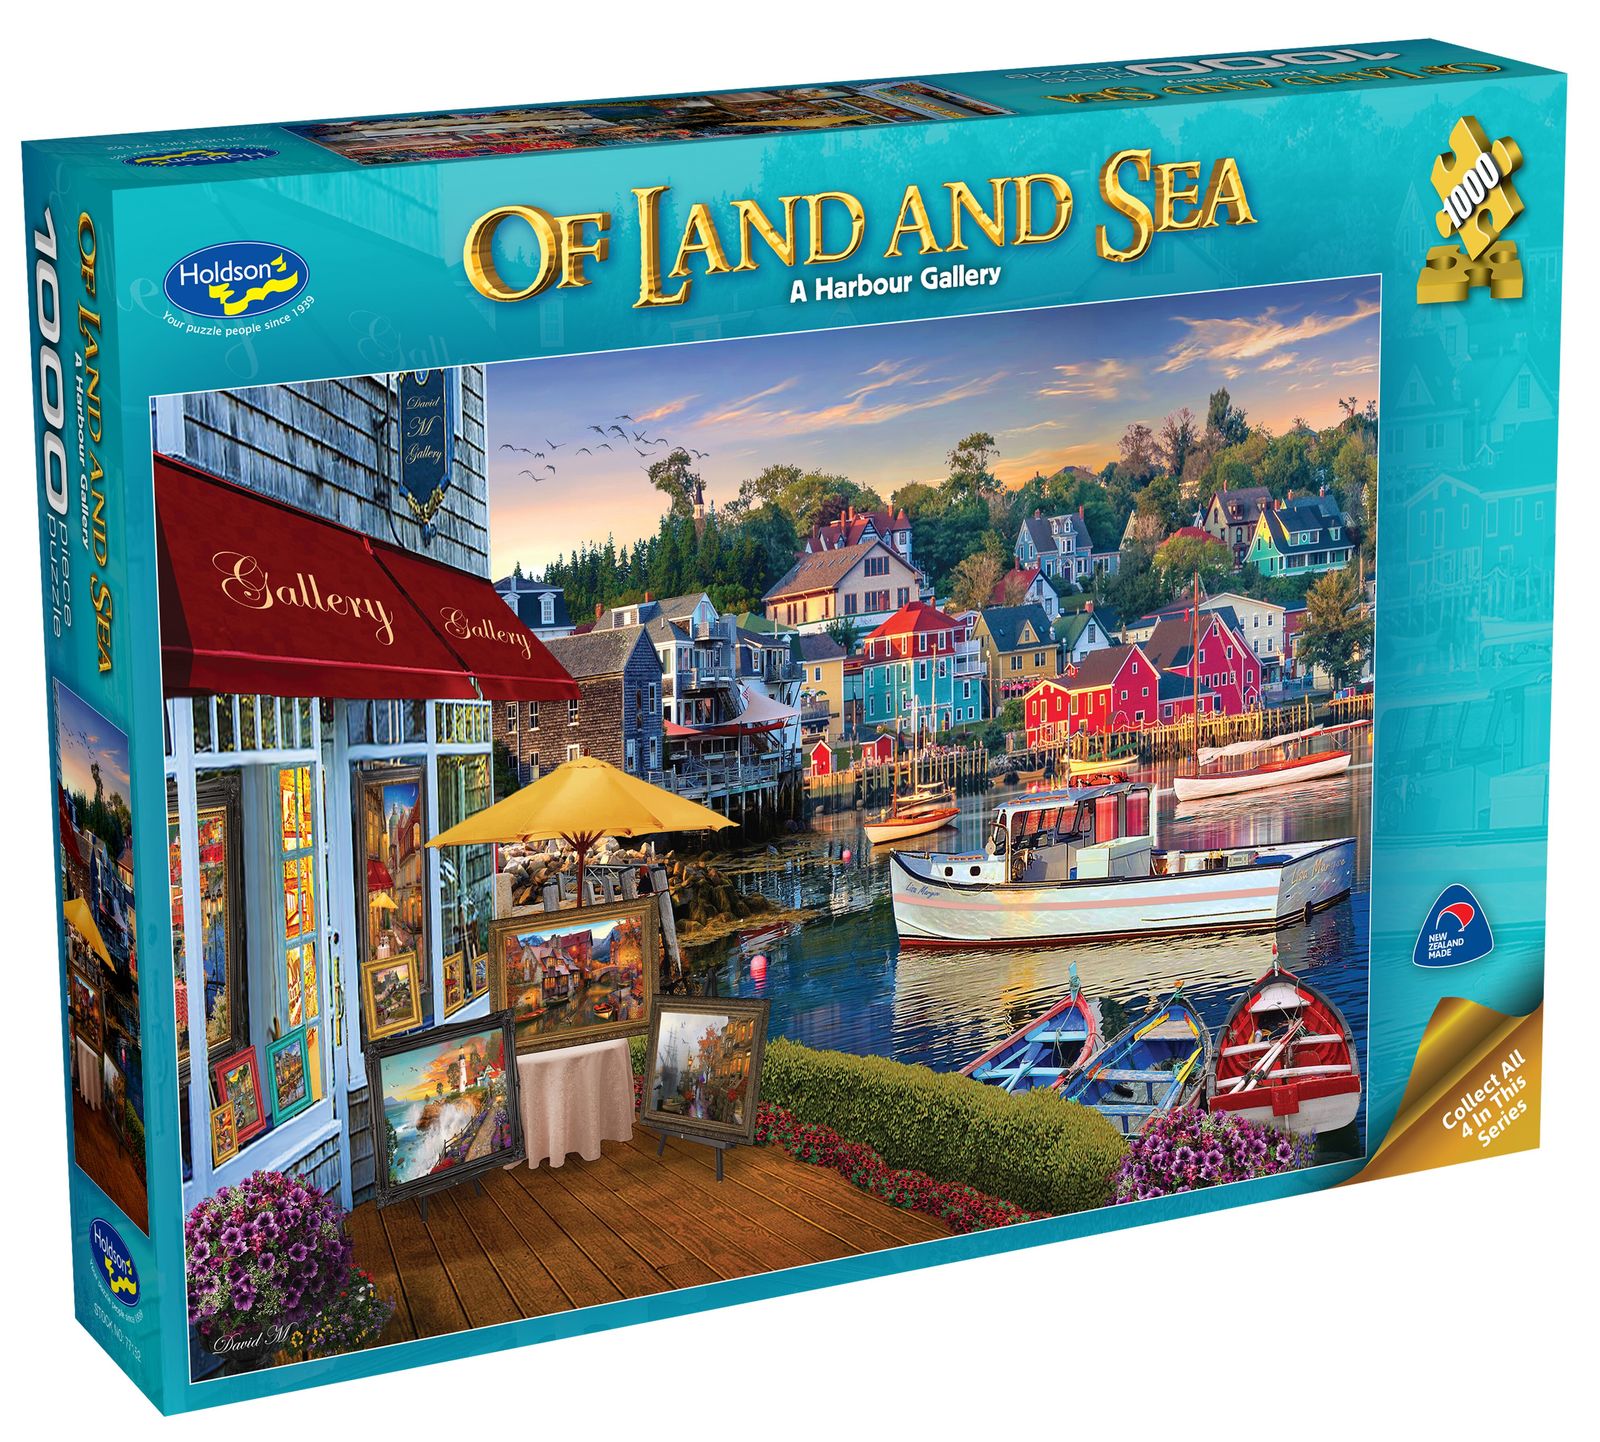 Of Land and Sea: A Harbour Gallery (1000pc Jigsaw)